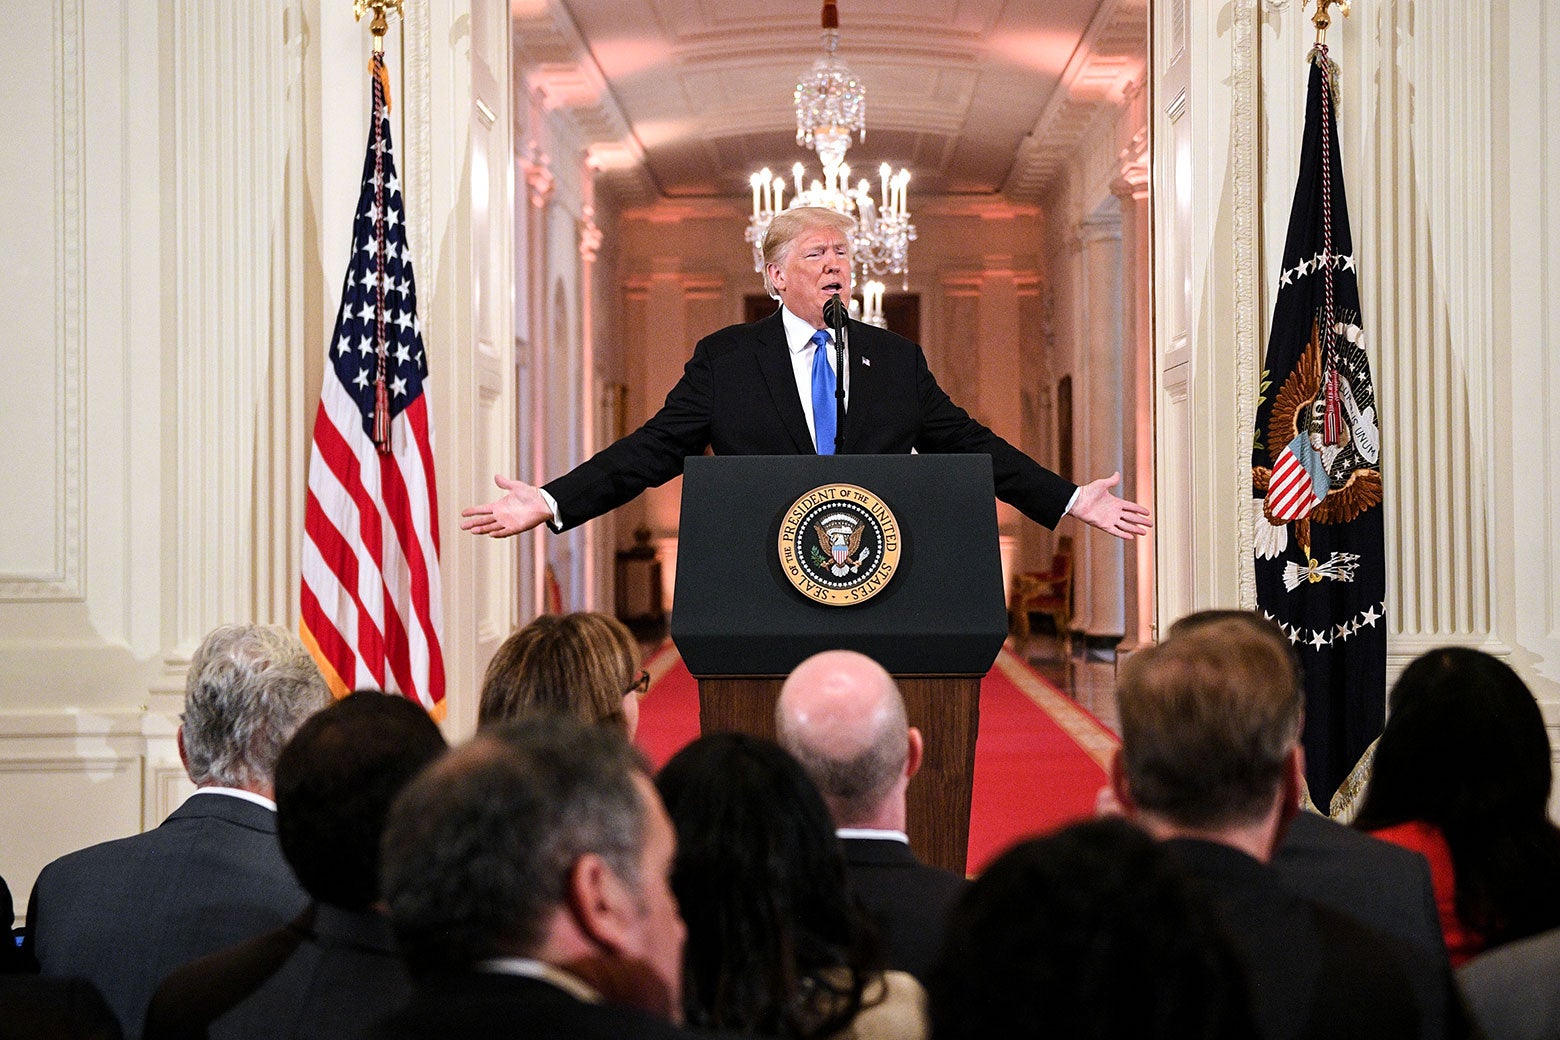 President Donald Trump speaks during a press conference at the White House in Washington on Wednesday.